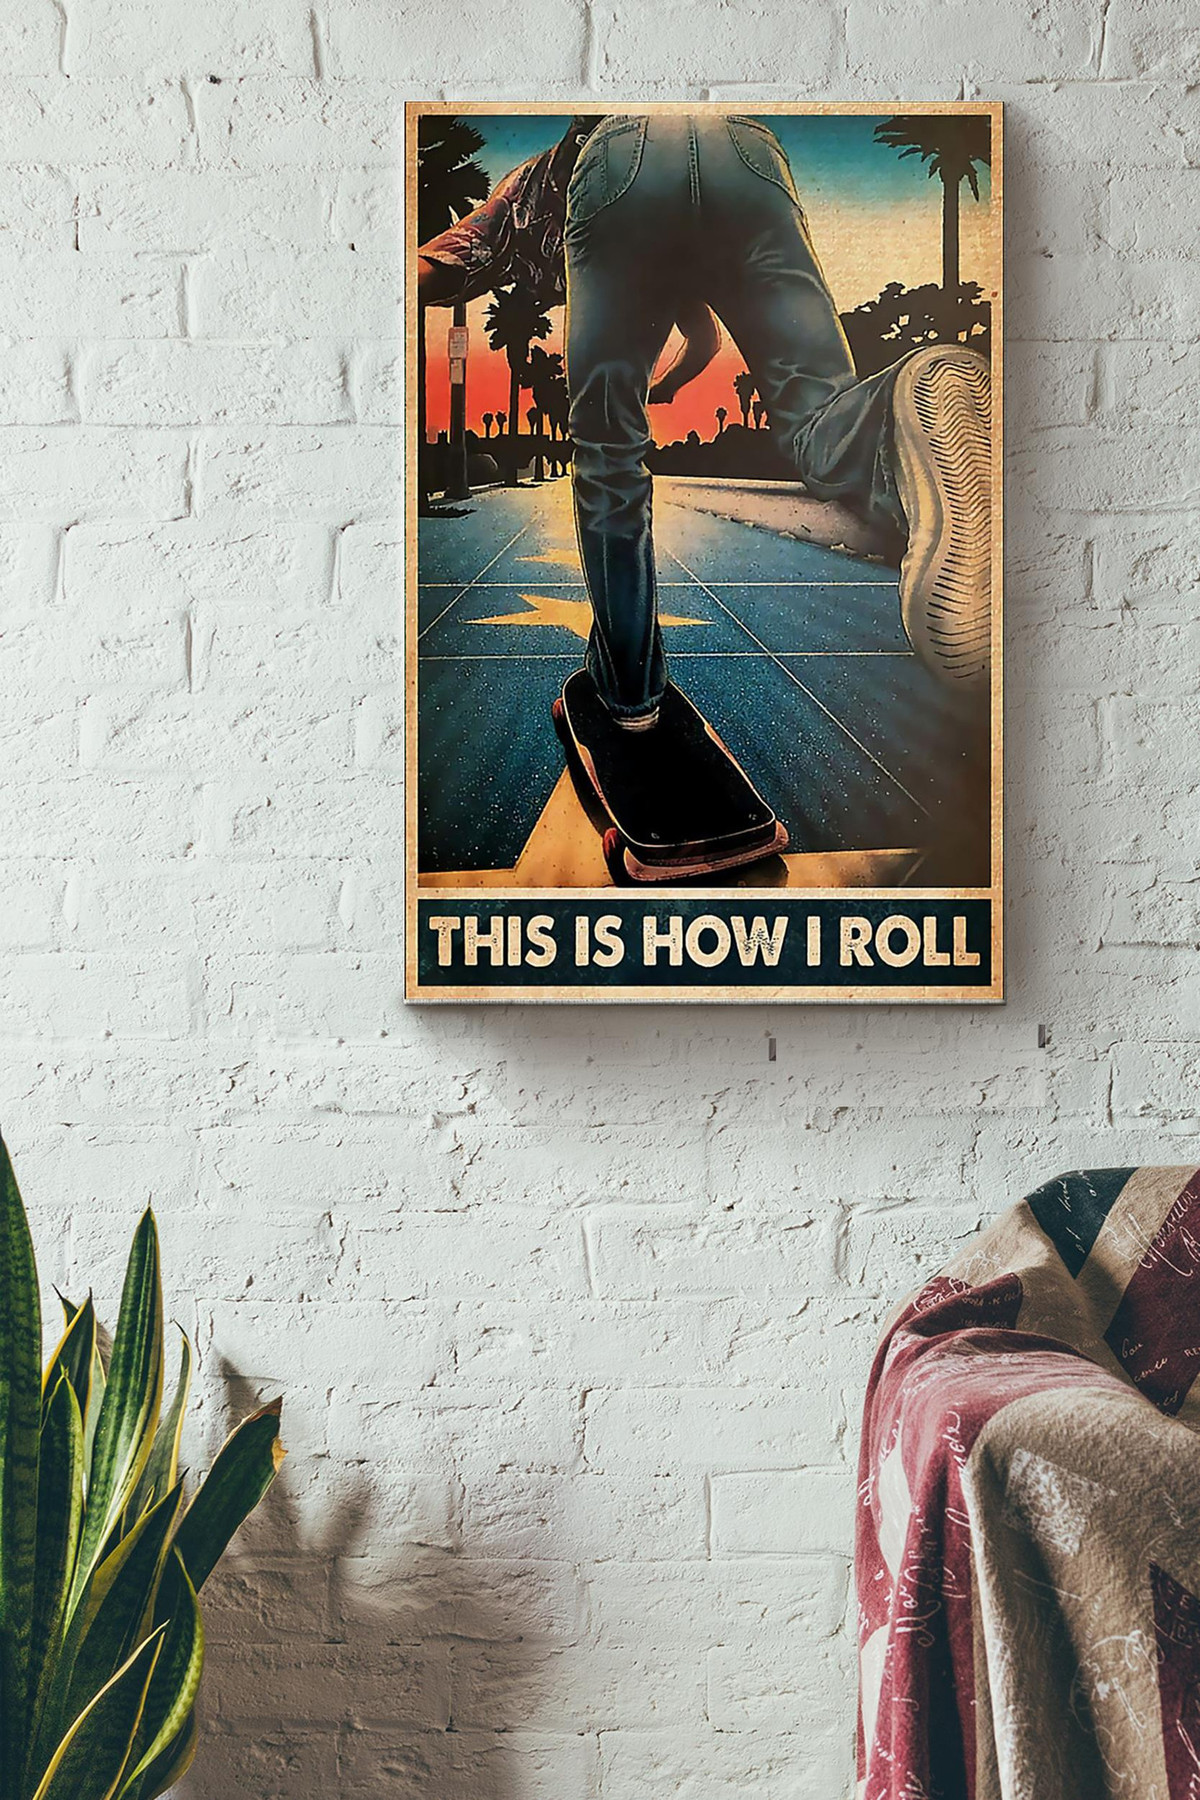 This I How I Roll Skateboarding Canvas Canvas Gallery Painting Wrapped Canvas  Wrapped Canvas 8x10